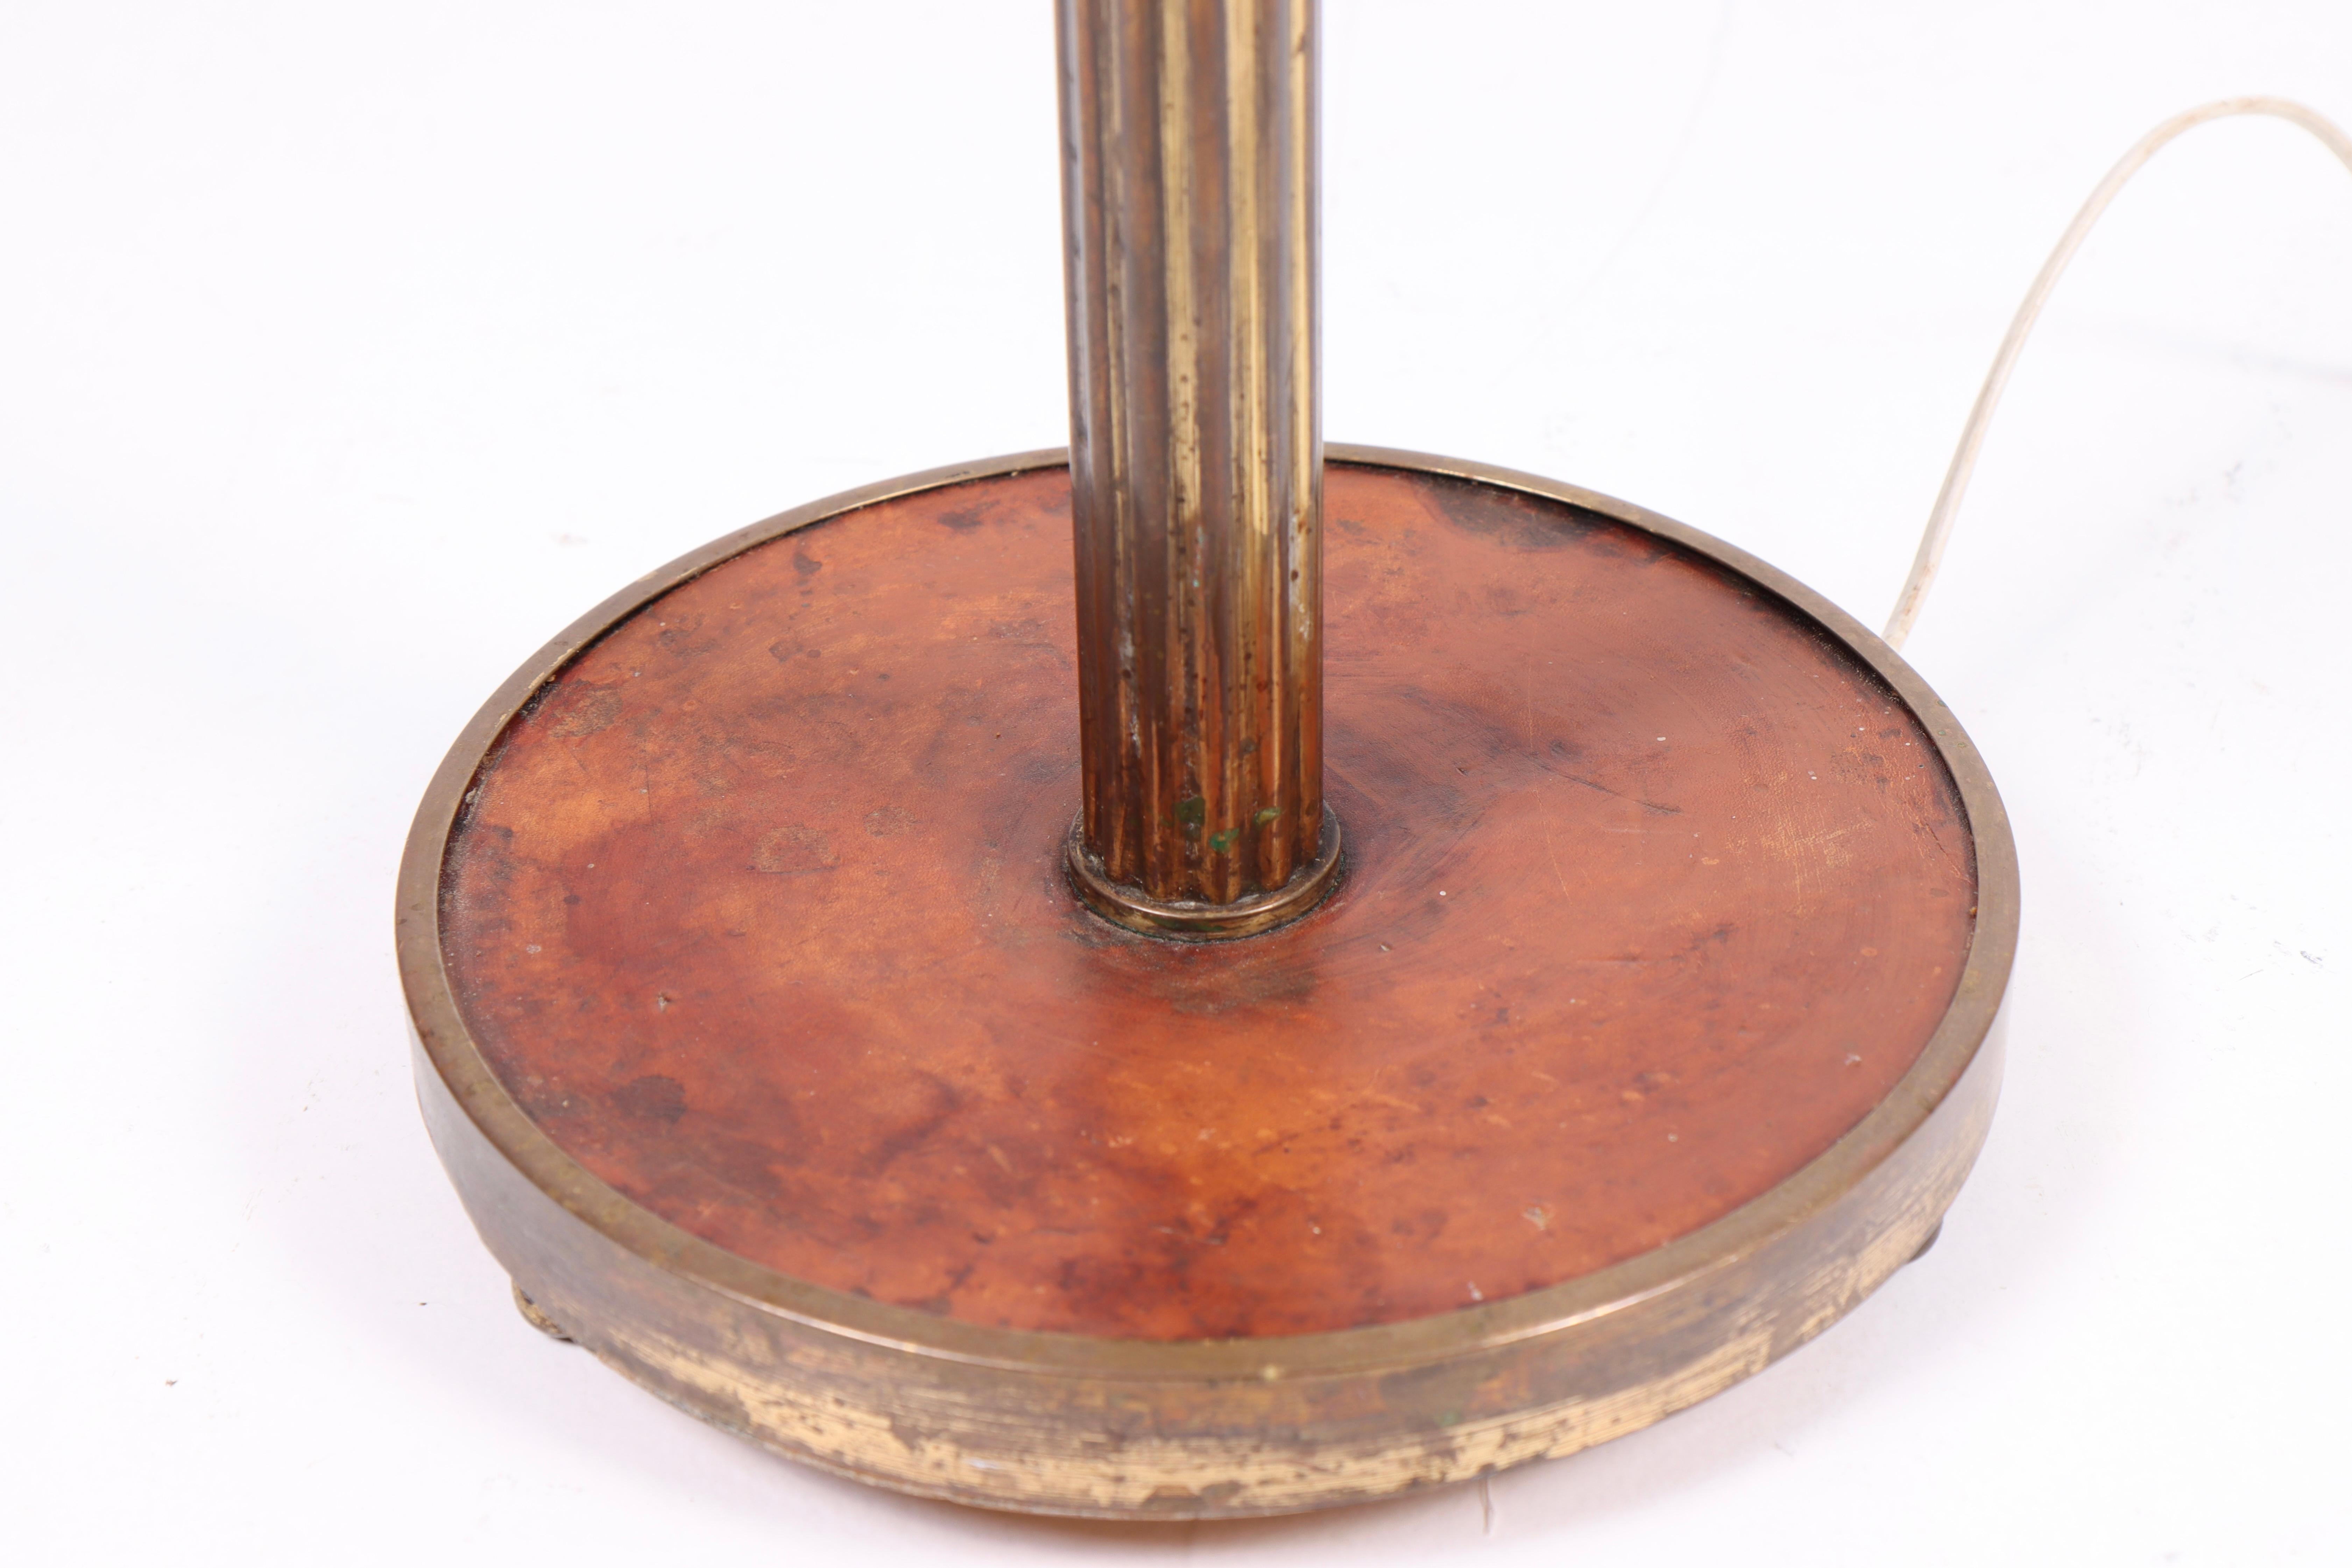 Elegant Floor Lamp in Patinated Brass and Leather, Swedish Modern, 1940s For Sale 4